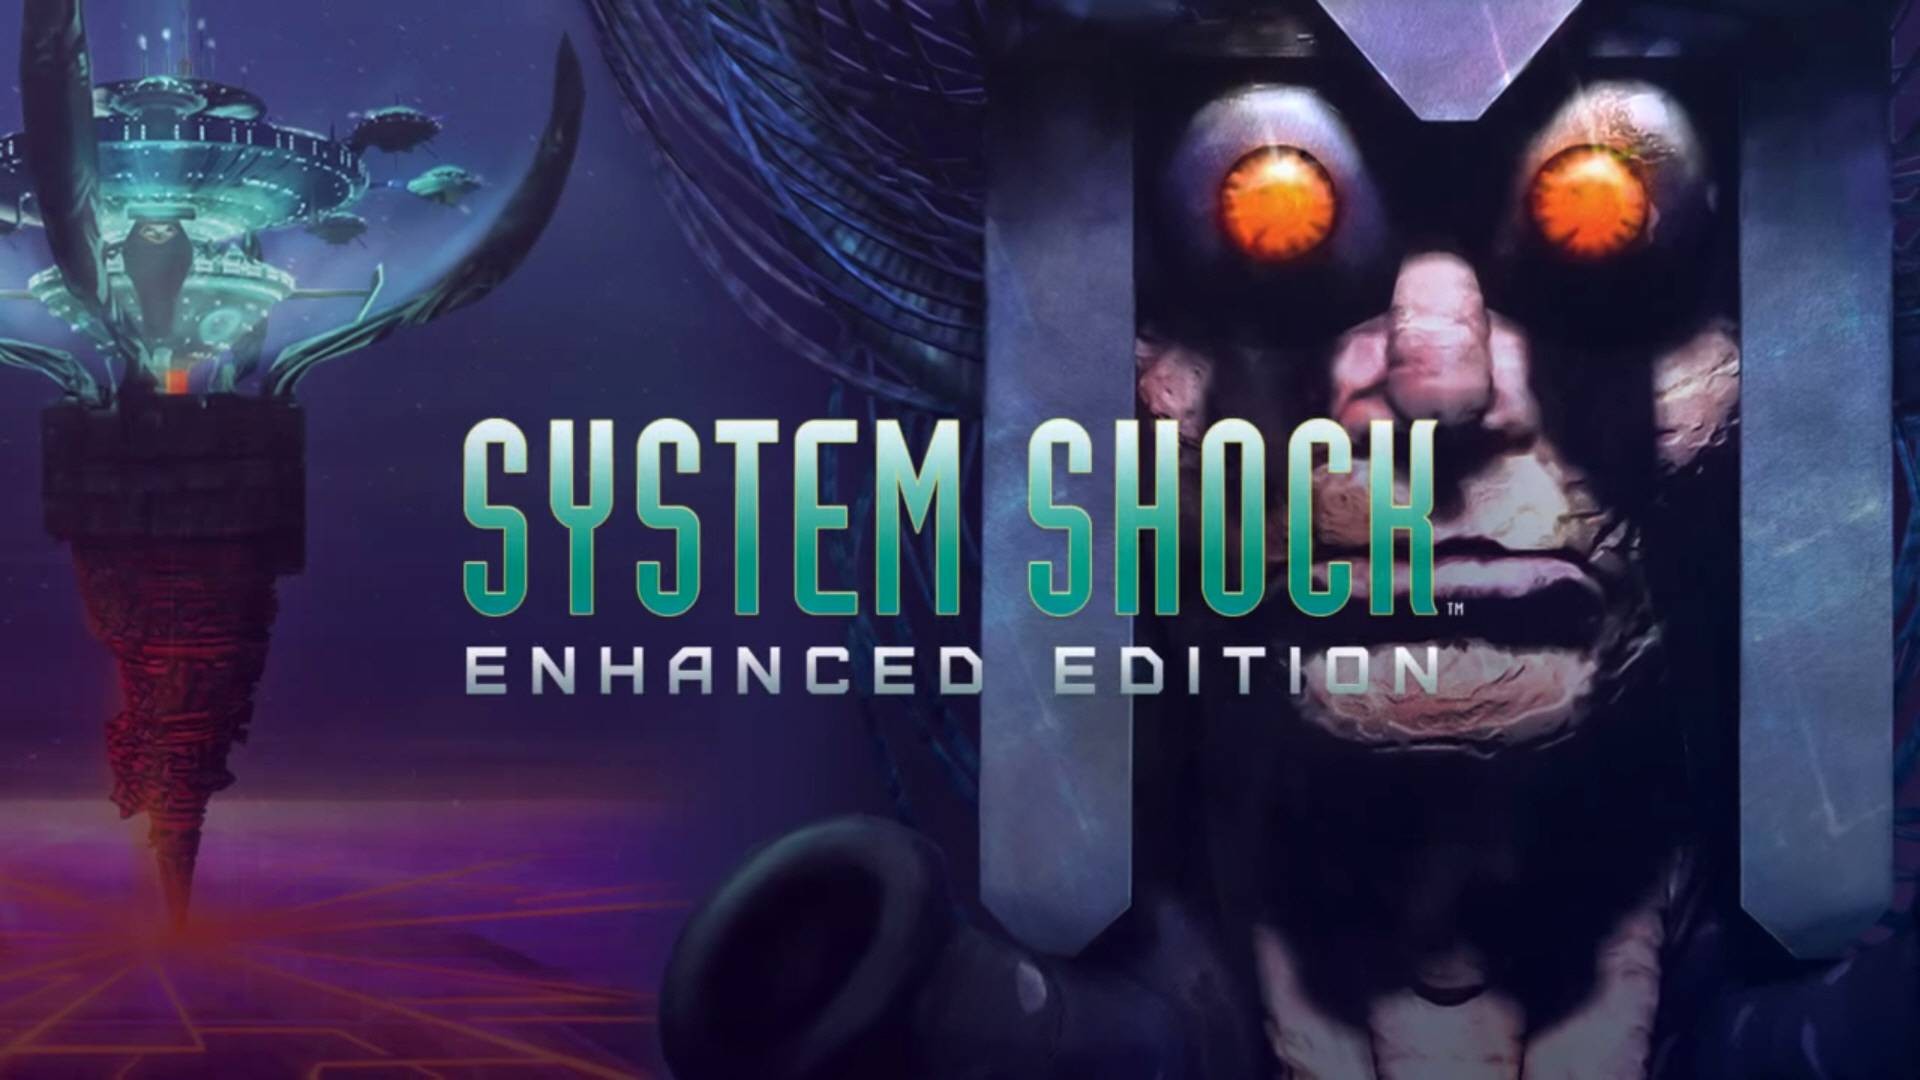 video games inspired by system shock